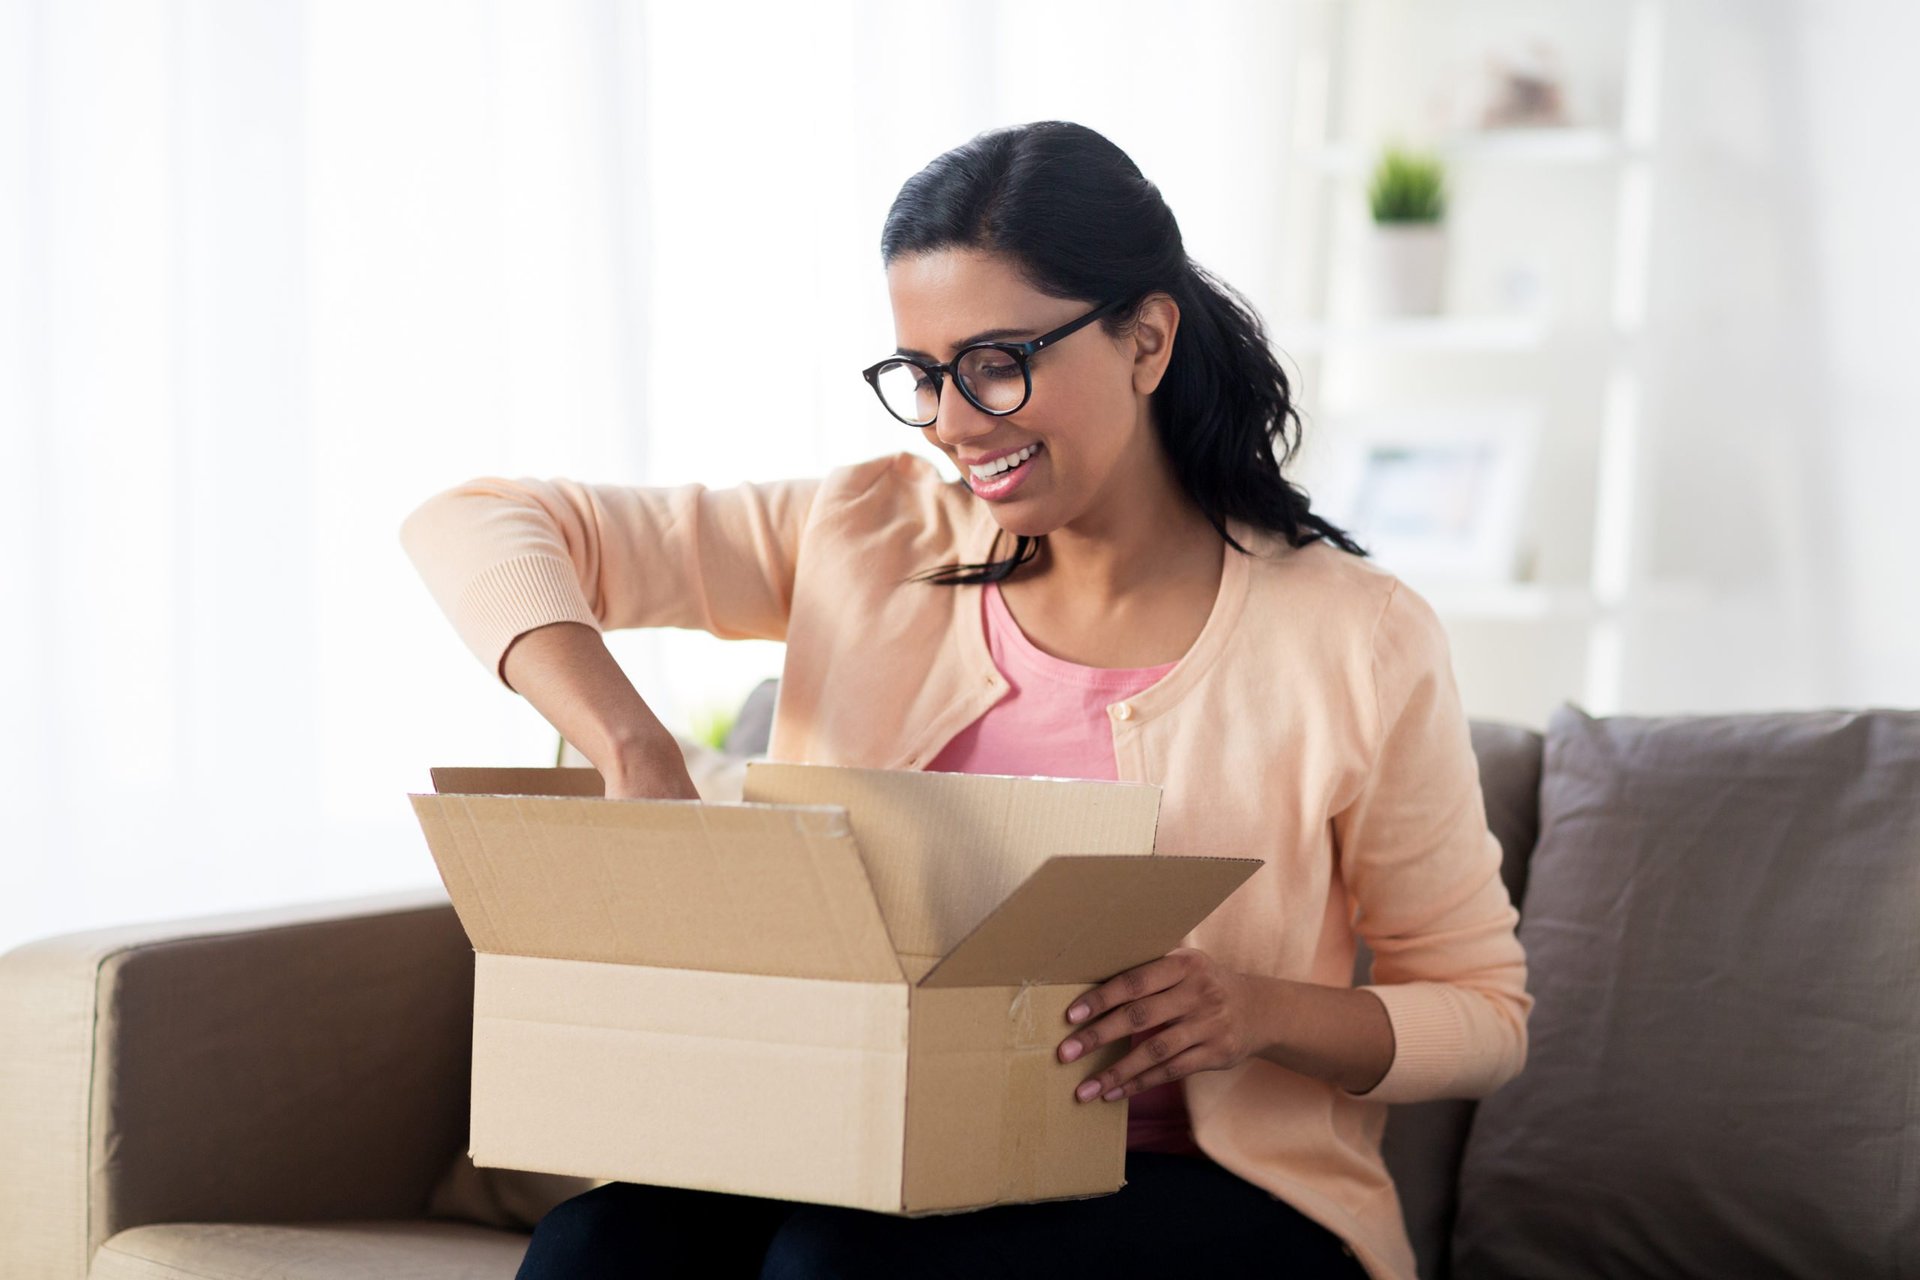 A young woman opens a package she received quickly with overnight shipping